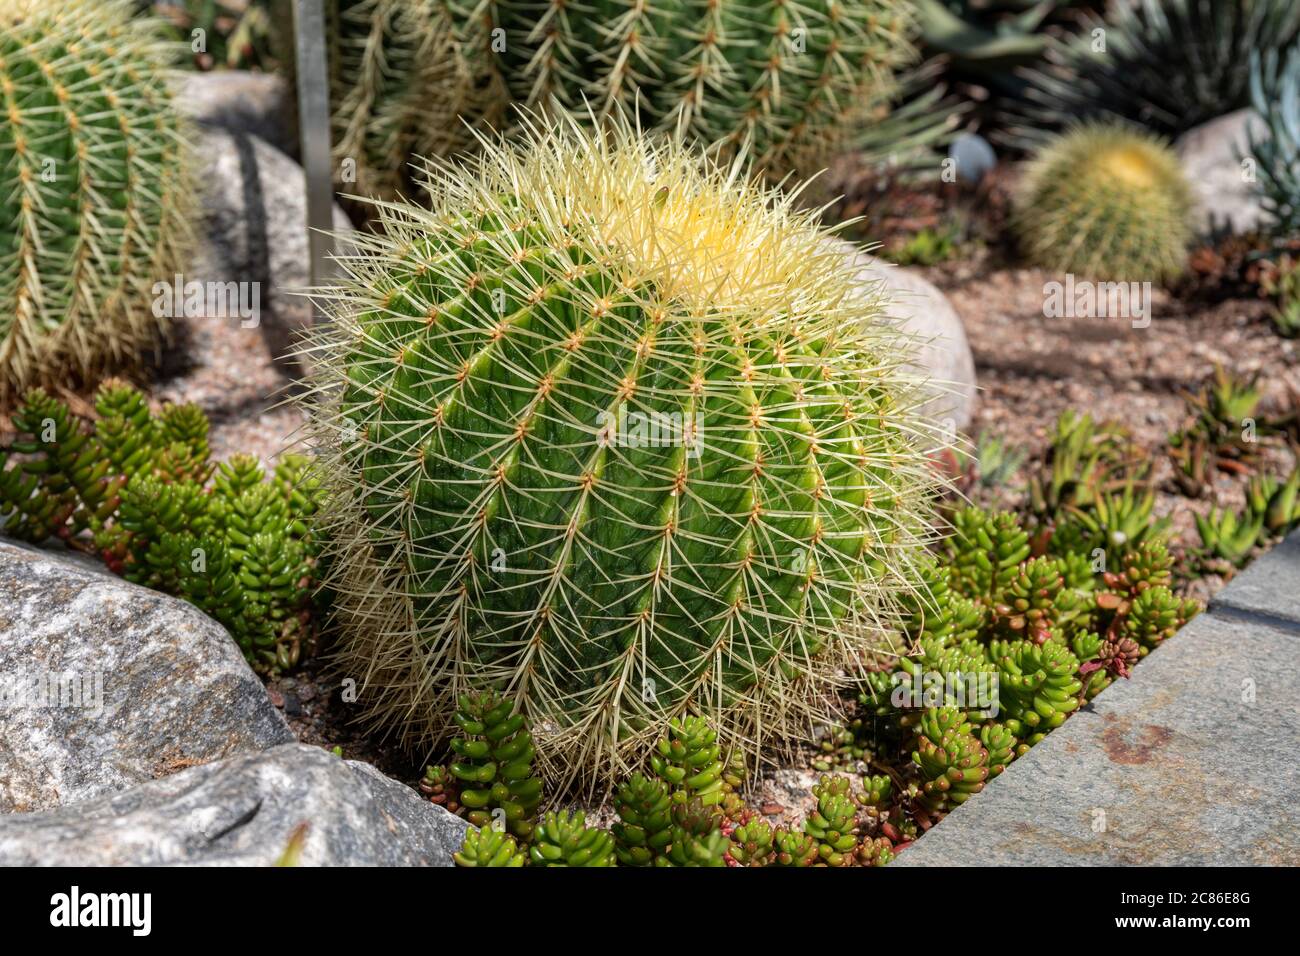 Echinocactus grusonii, popularly known as the golden barrel cactus, golden ball or mother-in-law's cushion in Helsinki Winter Garden greenery, Finland Stock Photo